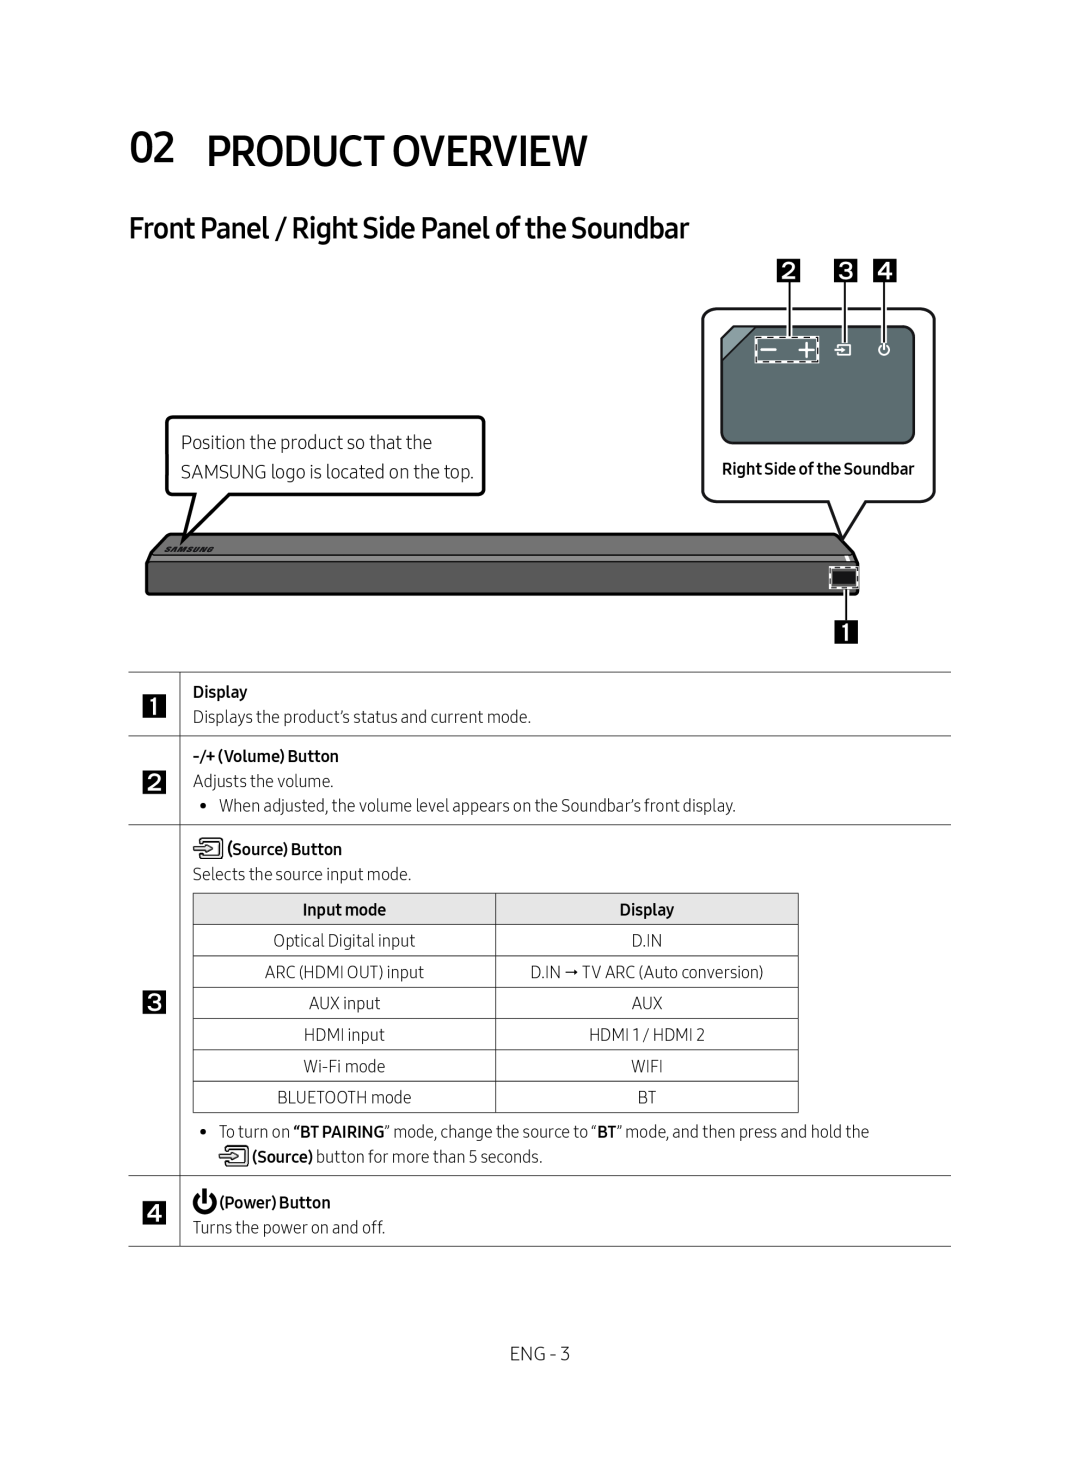 Front Panel / Right Side Panel of the Soundbar Standard HW-MS750